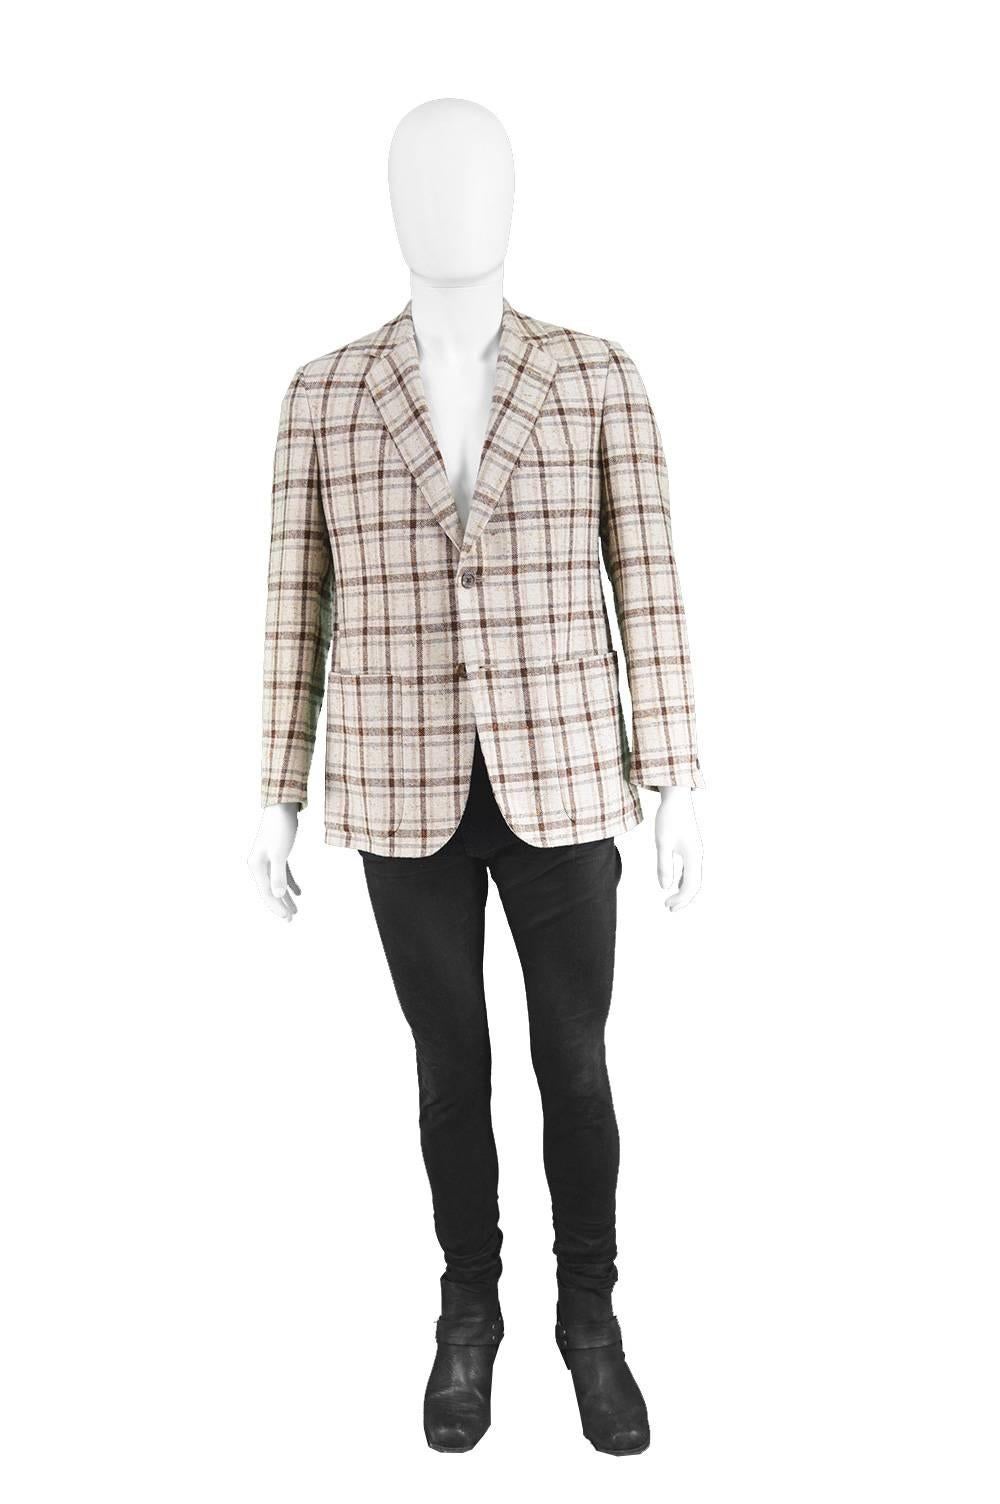 Aquascutum Mens Cream & Brown Plaid Checked Flecked Wool Blend Blazer, 1970s

Estimated Size: Marked to fit 40